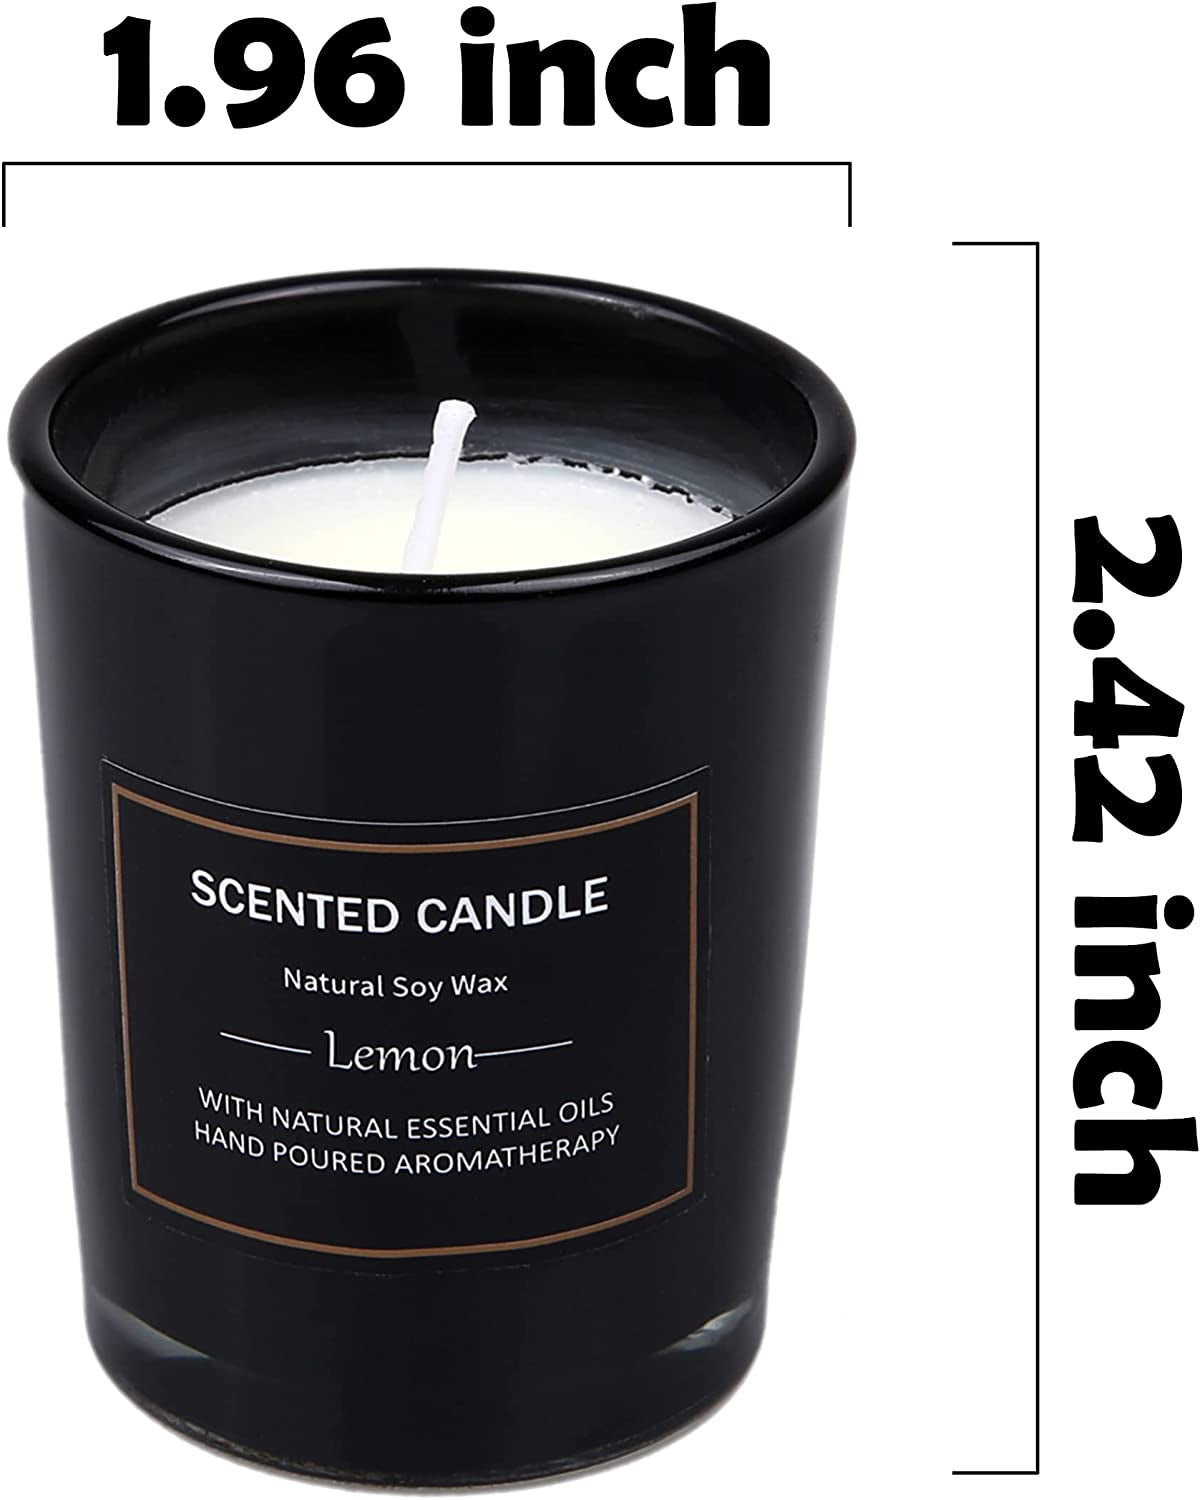 12 Pack Scented Candles Gift Set 2.5Oz Strong Fragrance Aromatherapy Jar Candle Set Soy Wax Decorative Candles for Home Scented Bath and Body Works Candles Best Gifts for Women.